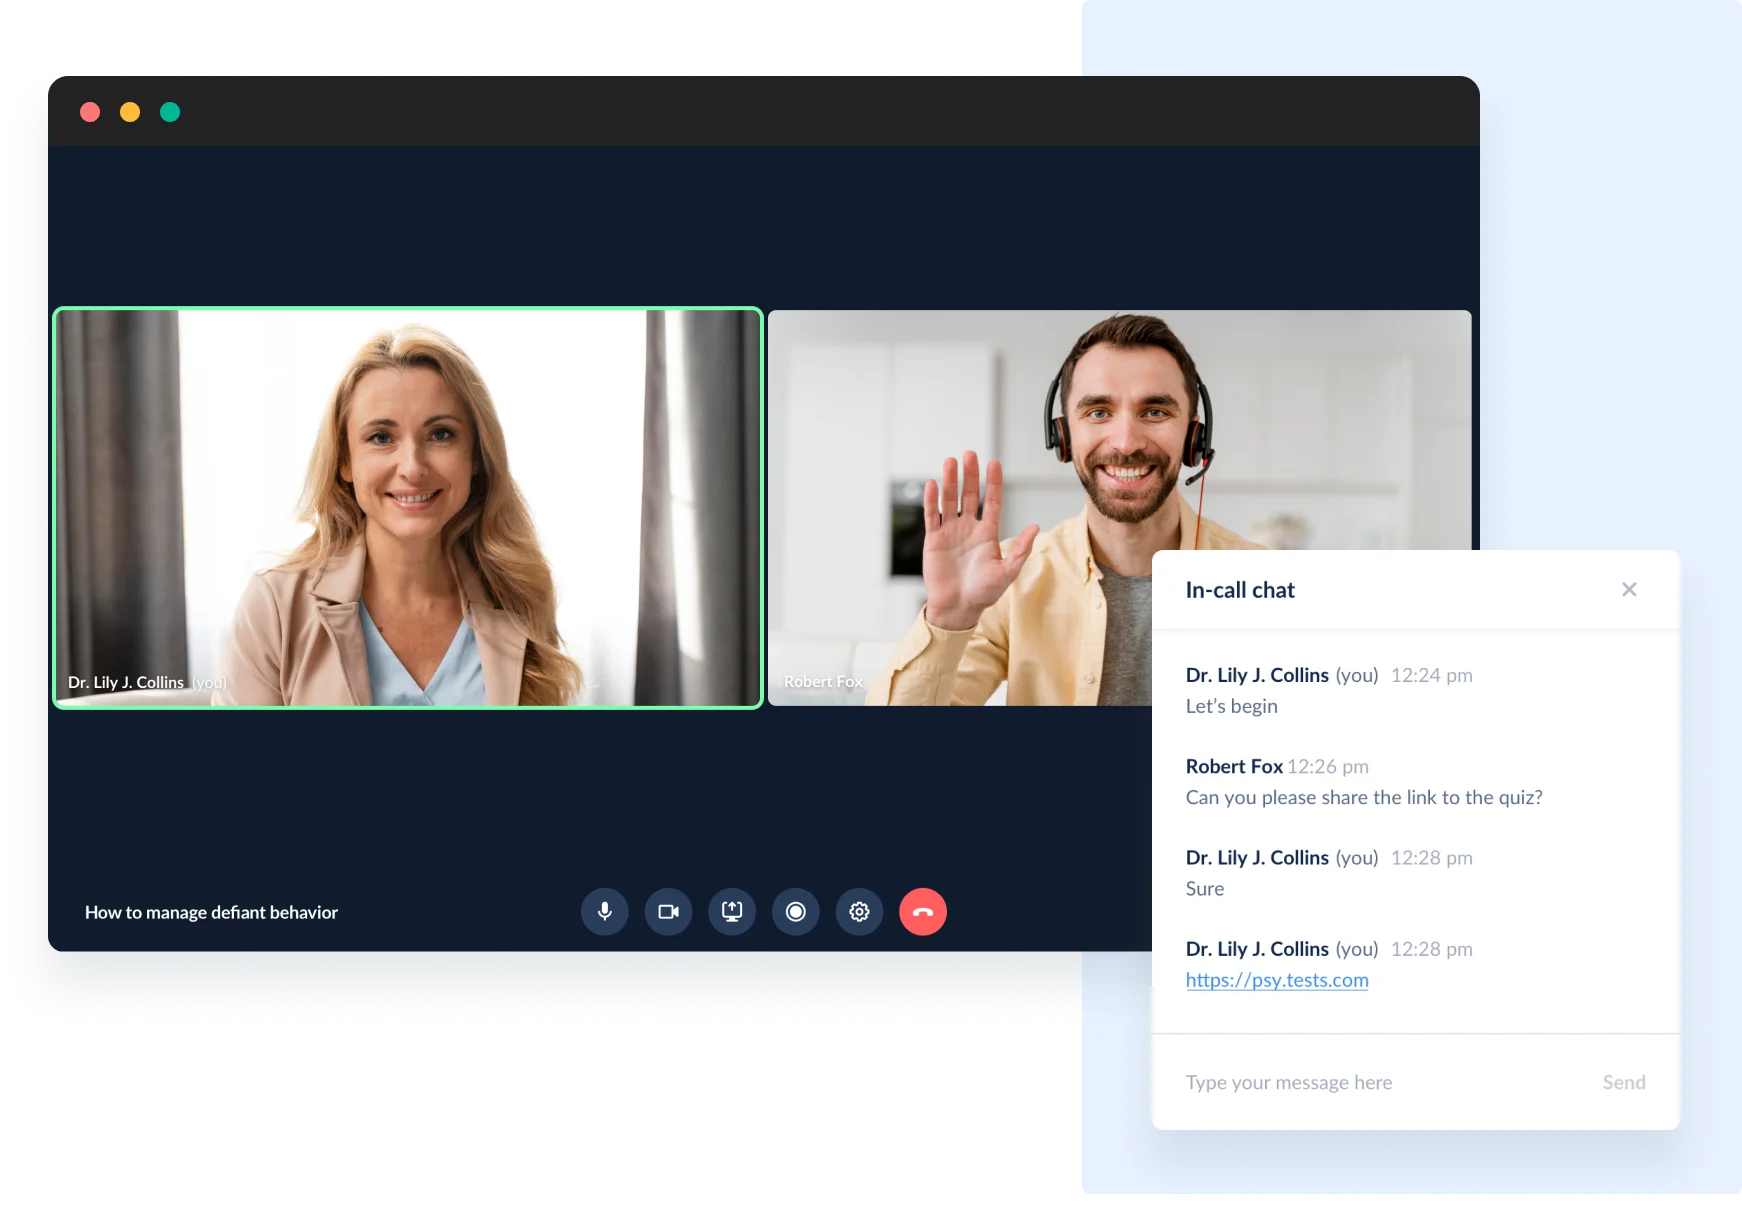 Video conferencing tool 